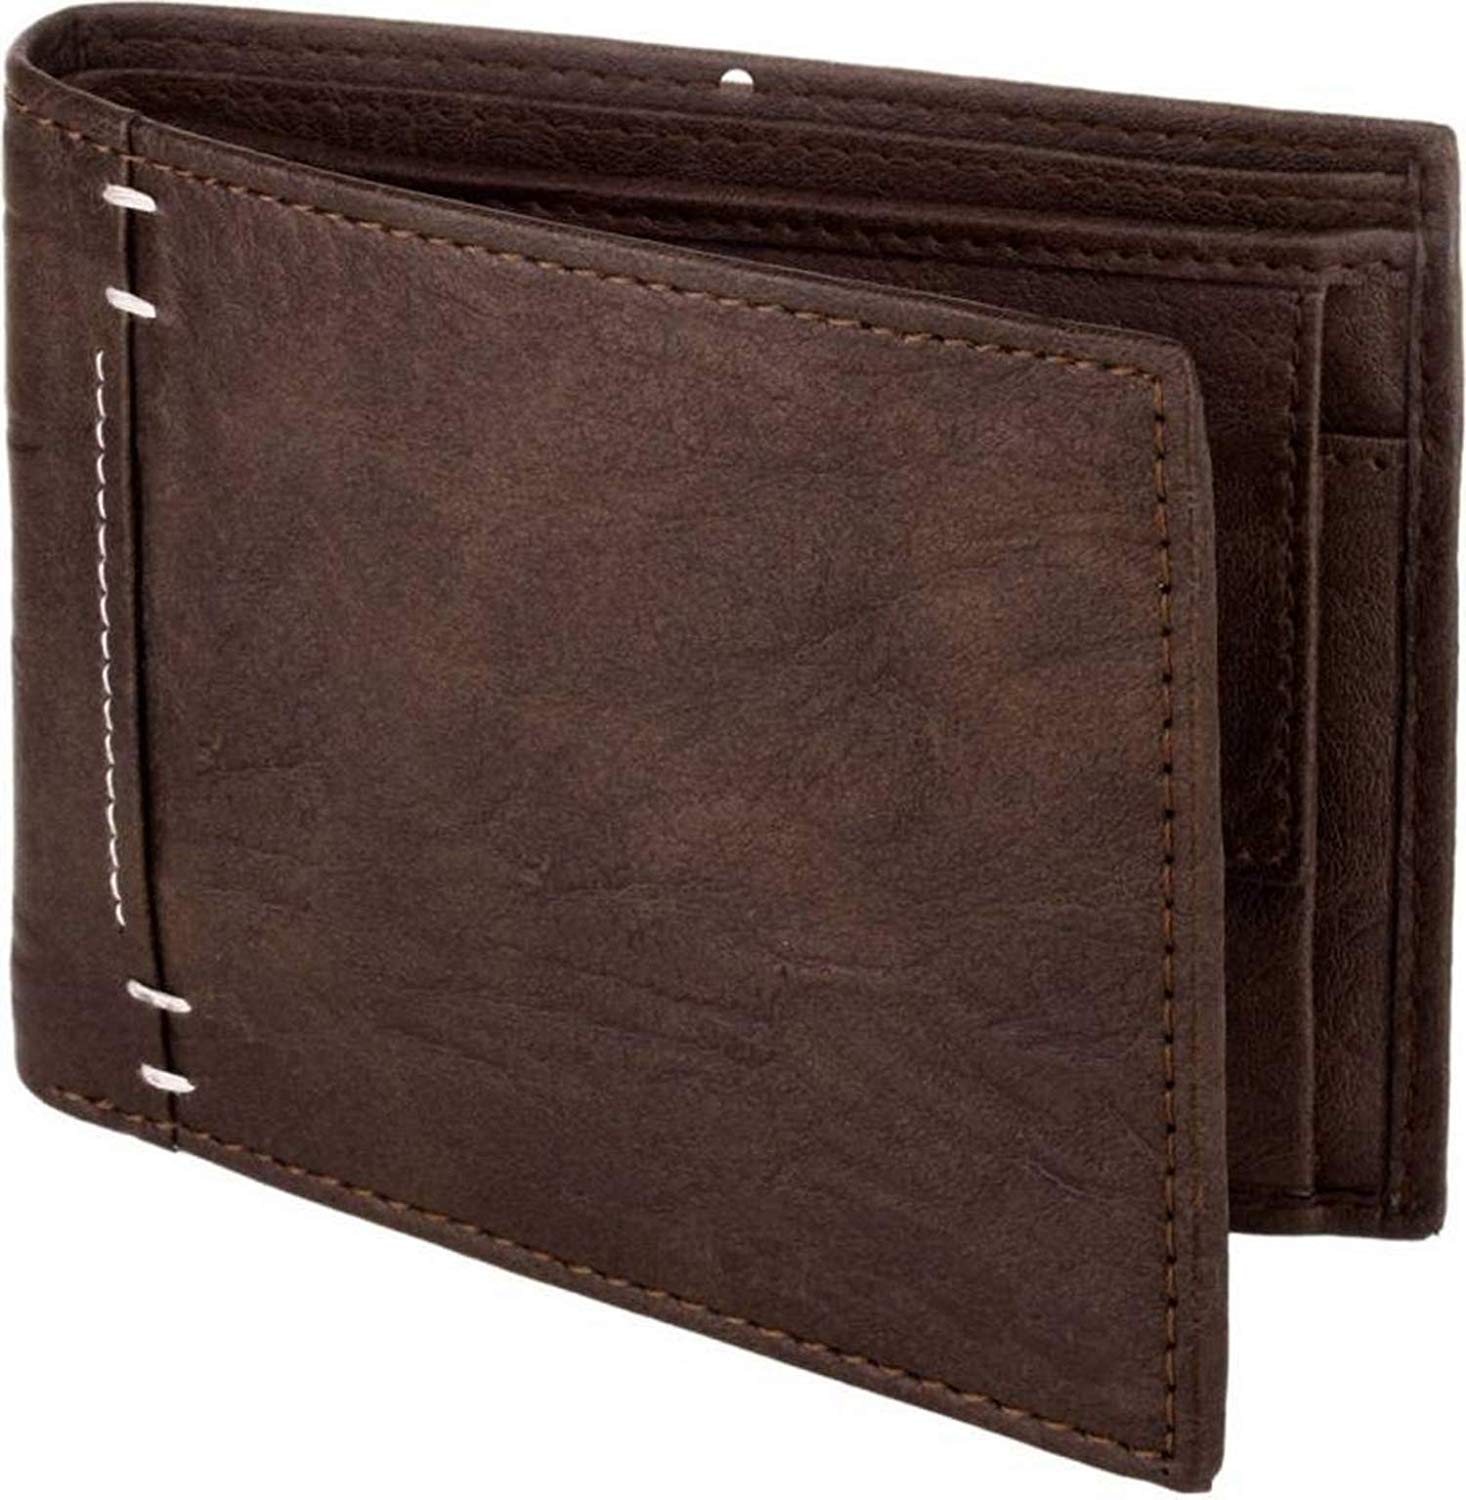 A list of perfect leather gift ideas for him